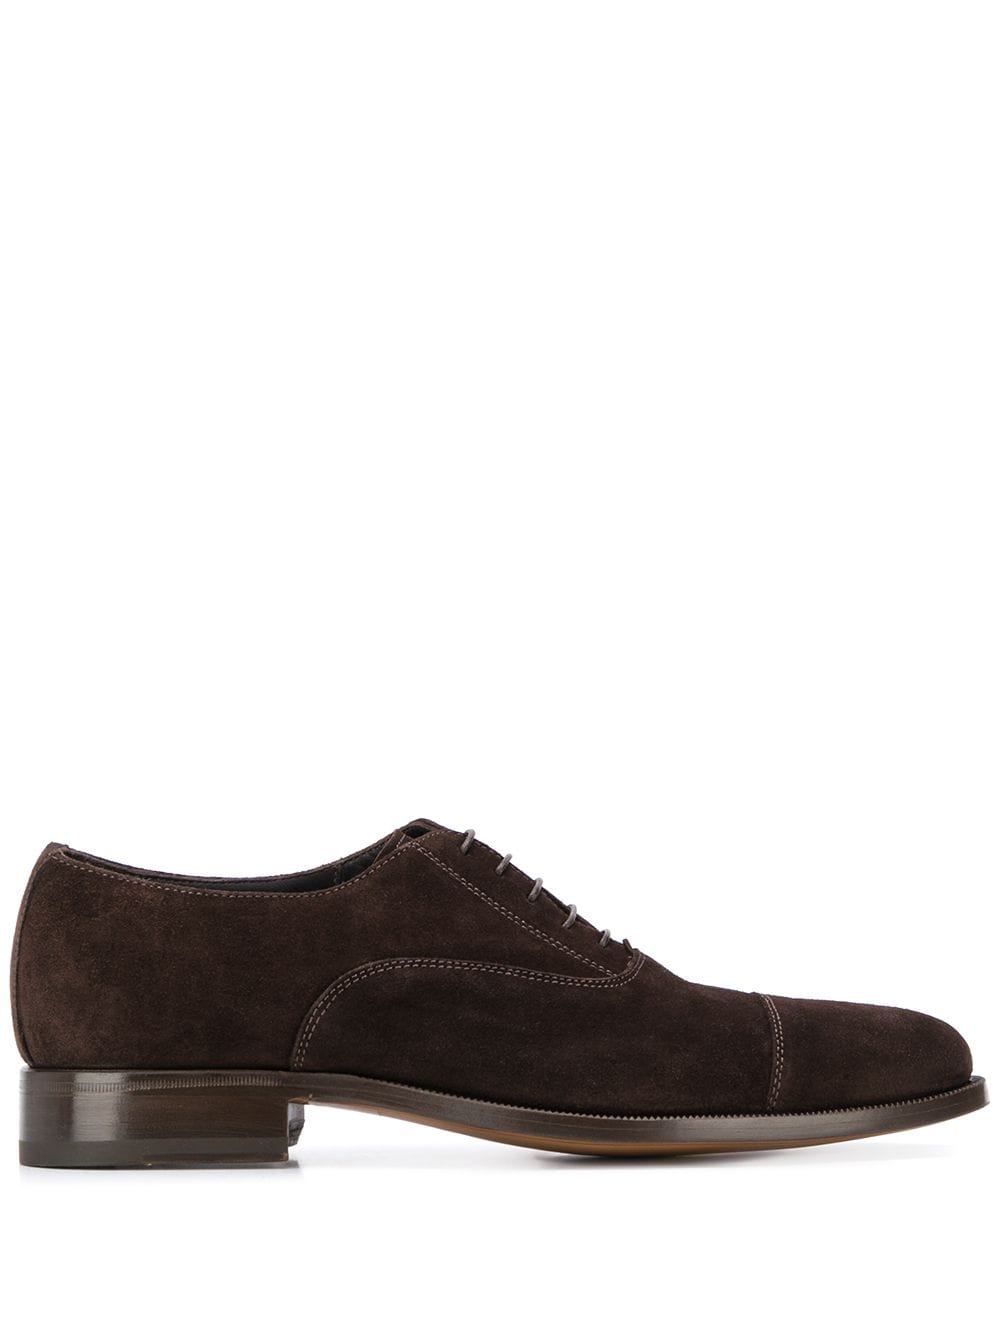 Scarosso Bacco lace-up Oxford shoes - Brown von Scarosso